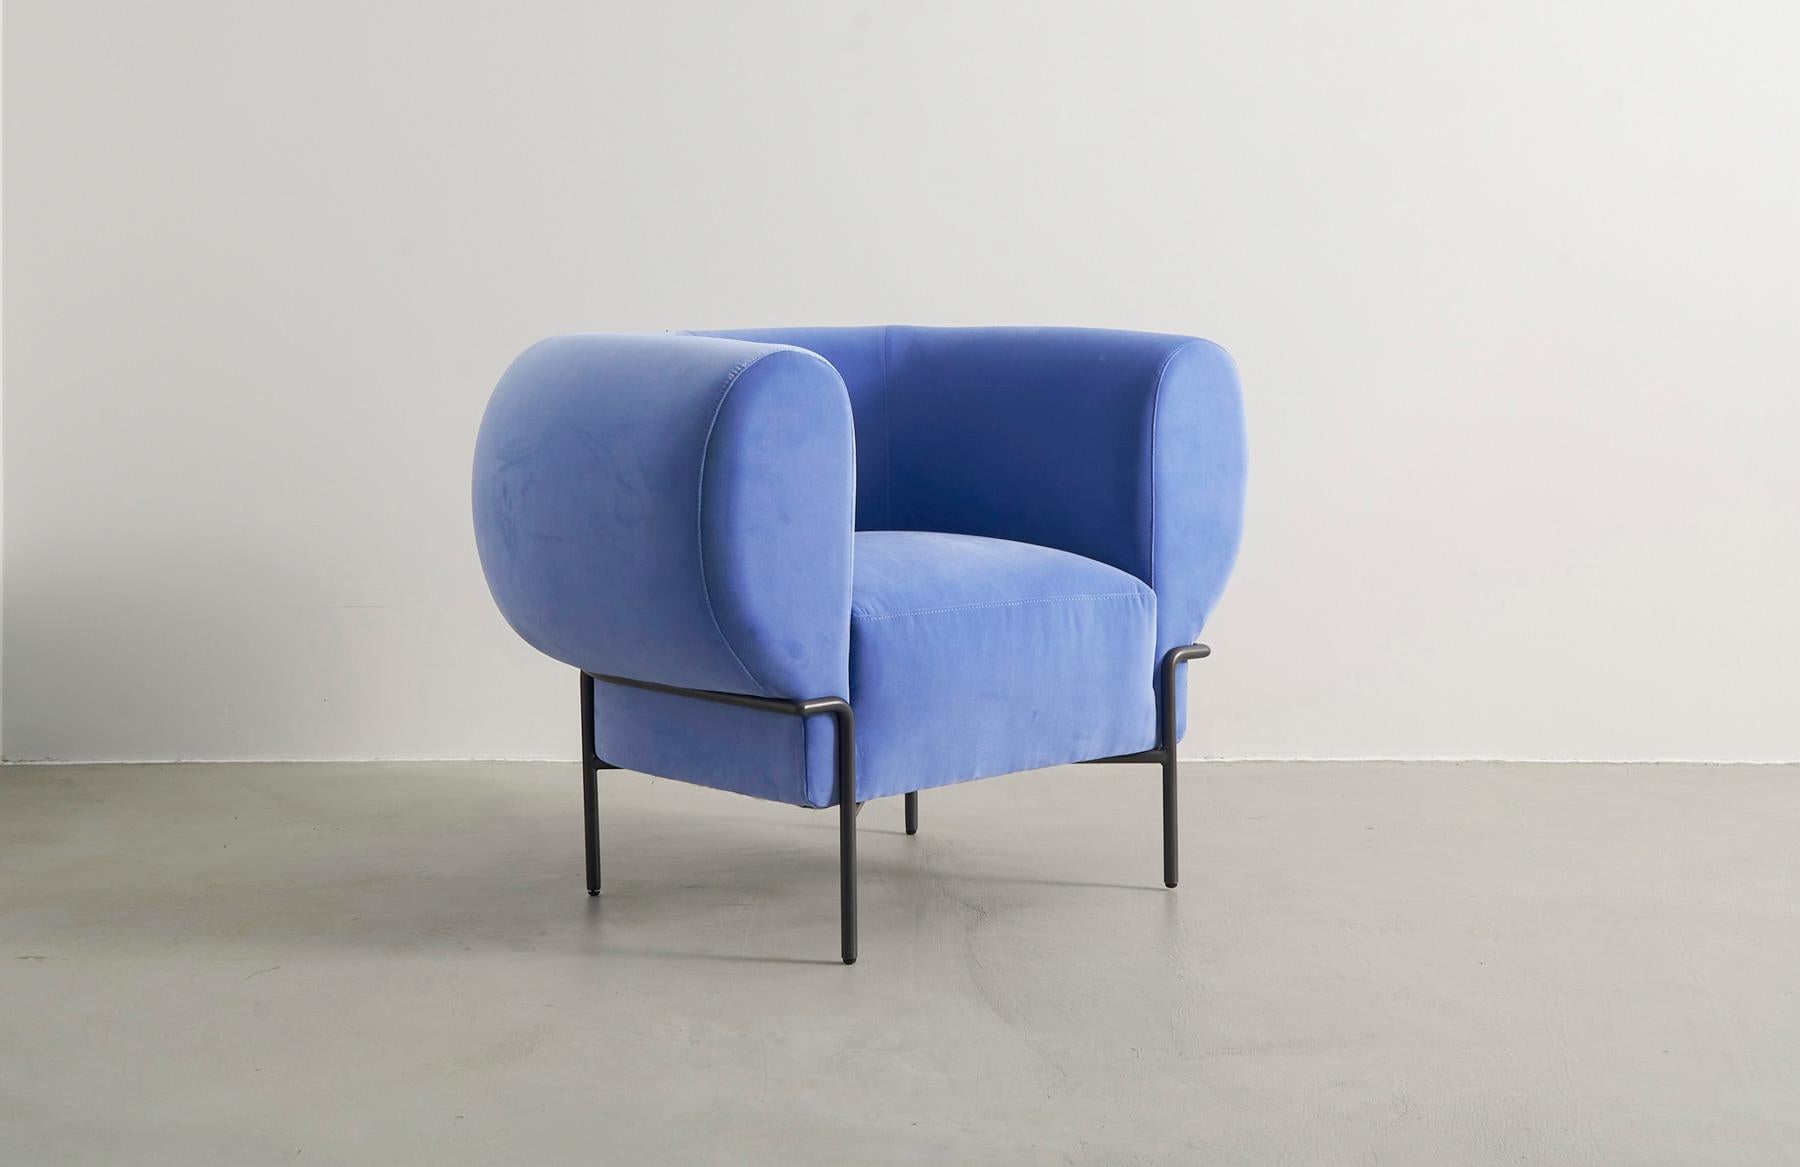 The Madda by Michael Felix is a contemporary, modern, and minimal velvet lounge chair inspired by the interpretation of classic mid-century club chairs. Its metal base wraps around the plump cushion as if to squeeze the seat full of support and